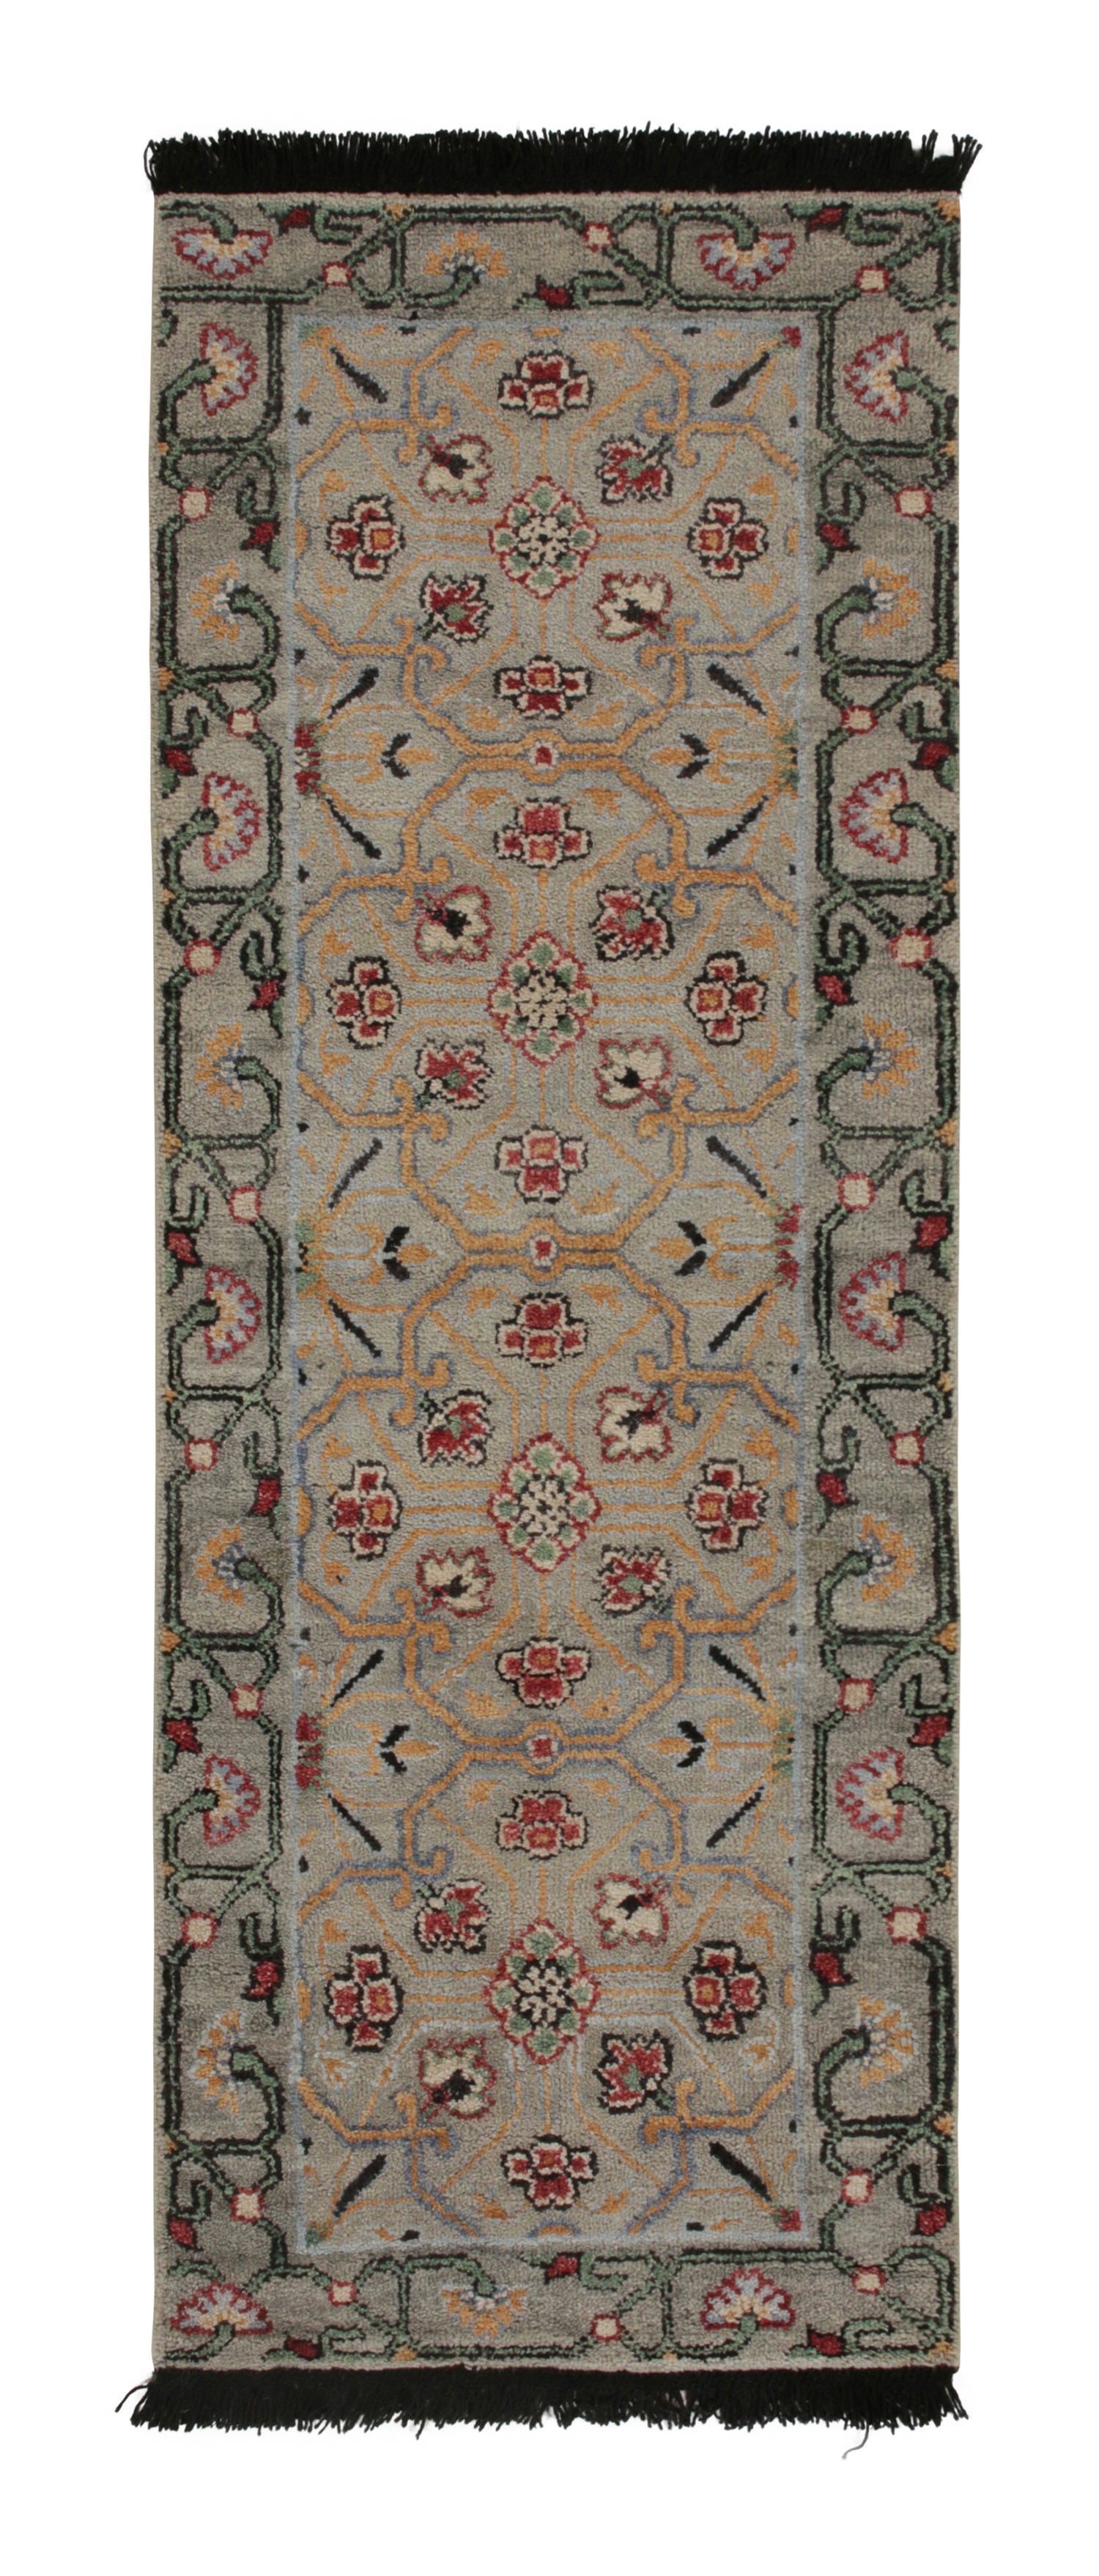 Rug & Kilim’s Classic Style Runner in Blue, Green and Red Floral Patterns